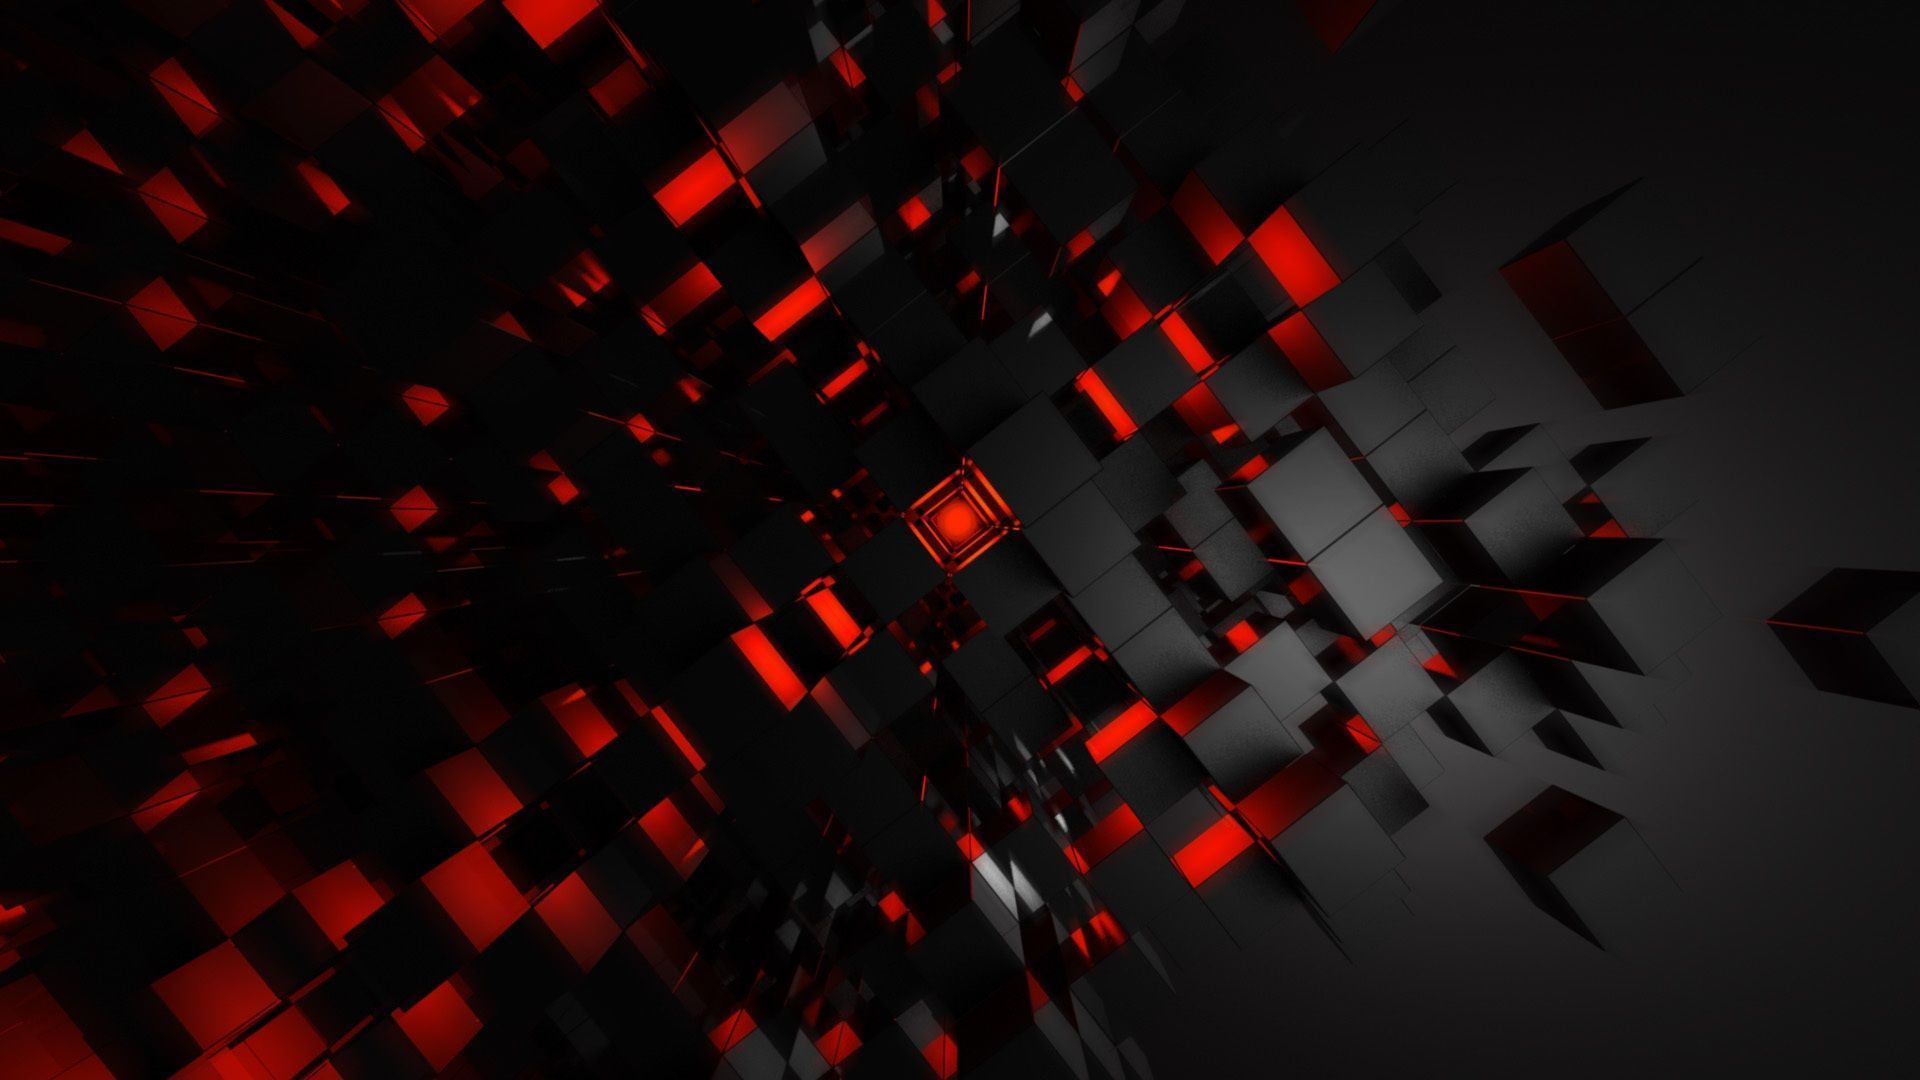 Red and Black Abstract Image 1024x768px #648448